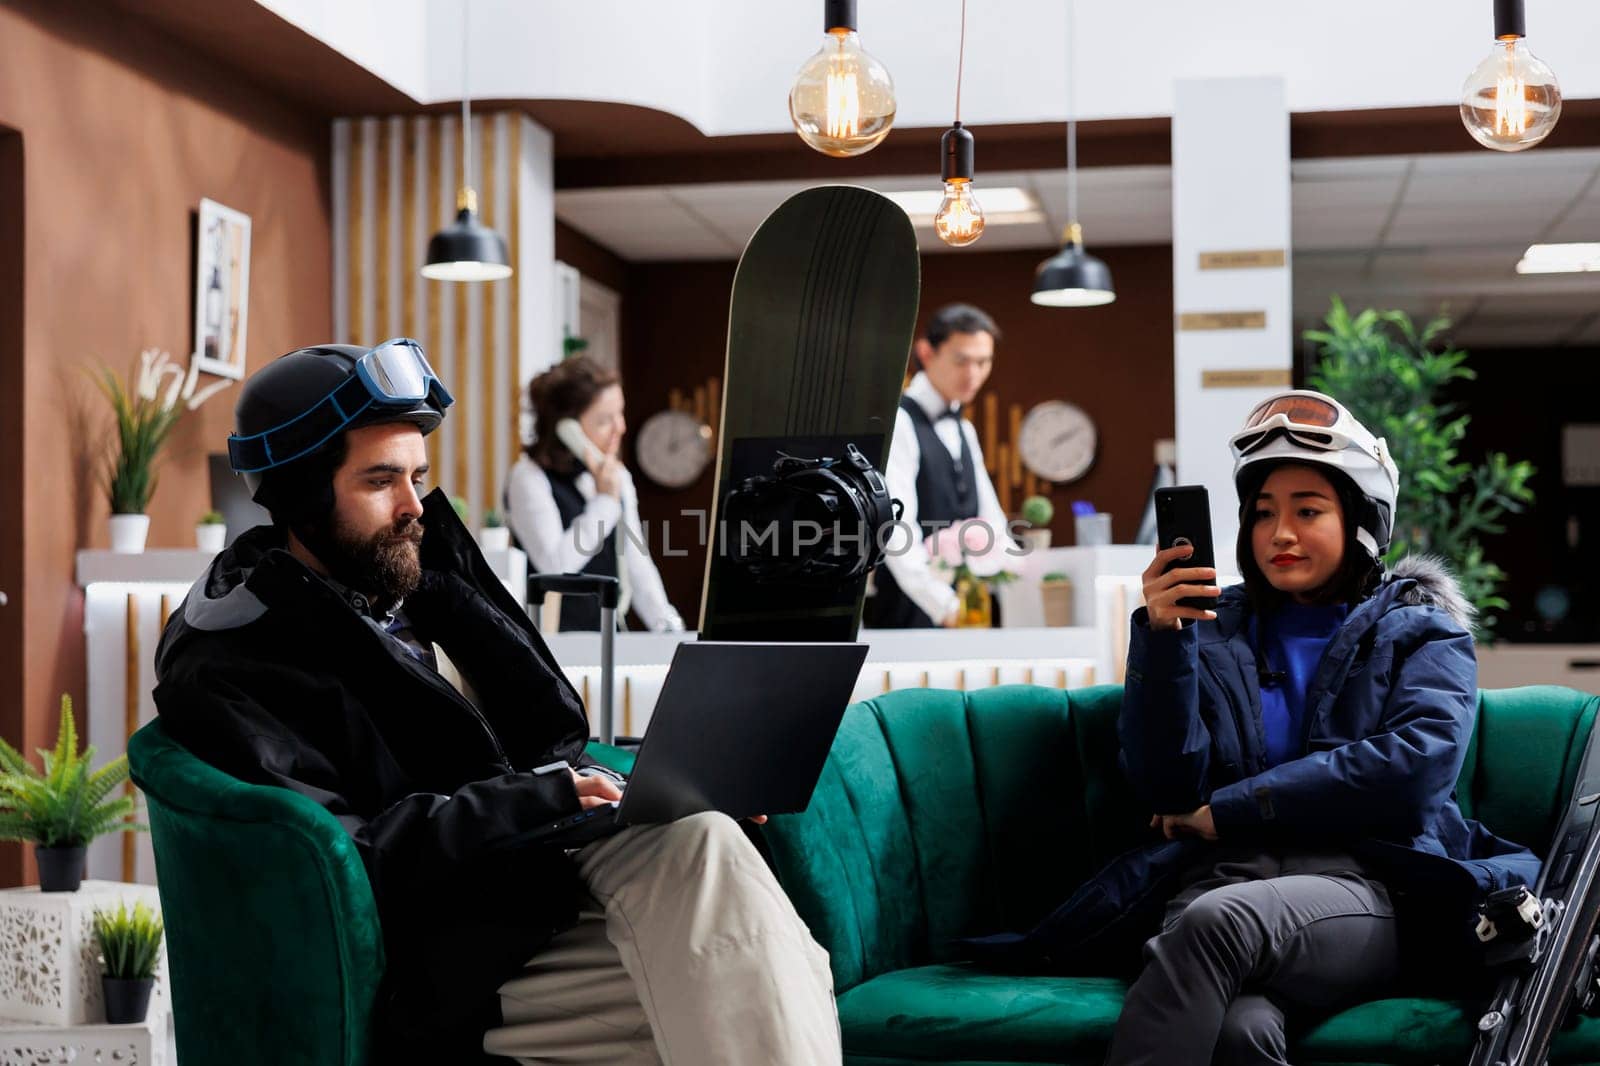 Boyfriend using laptop and girlfriend with mobile phone enjoying digital communication. Wintersports enthusiasts in hotel lobby for ski and snowboarding fun waiting with their smart devices.